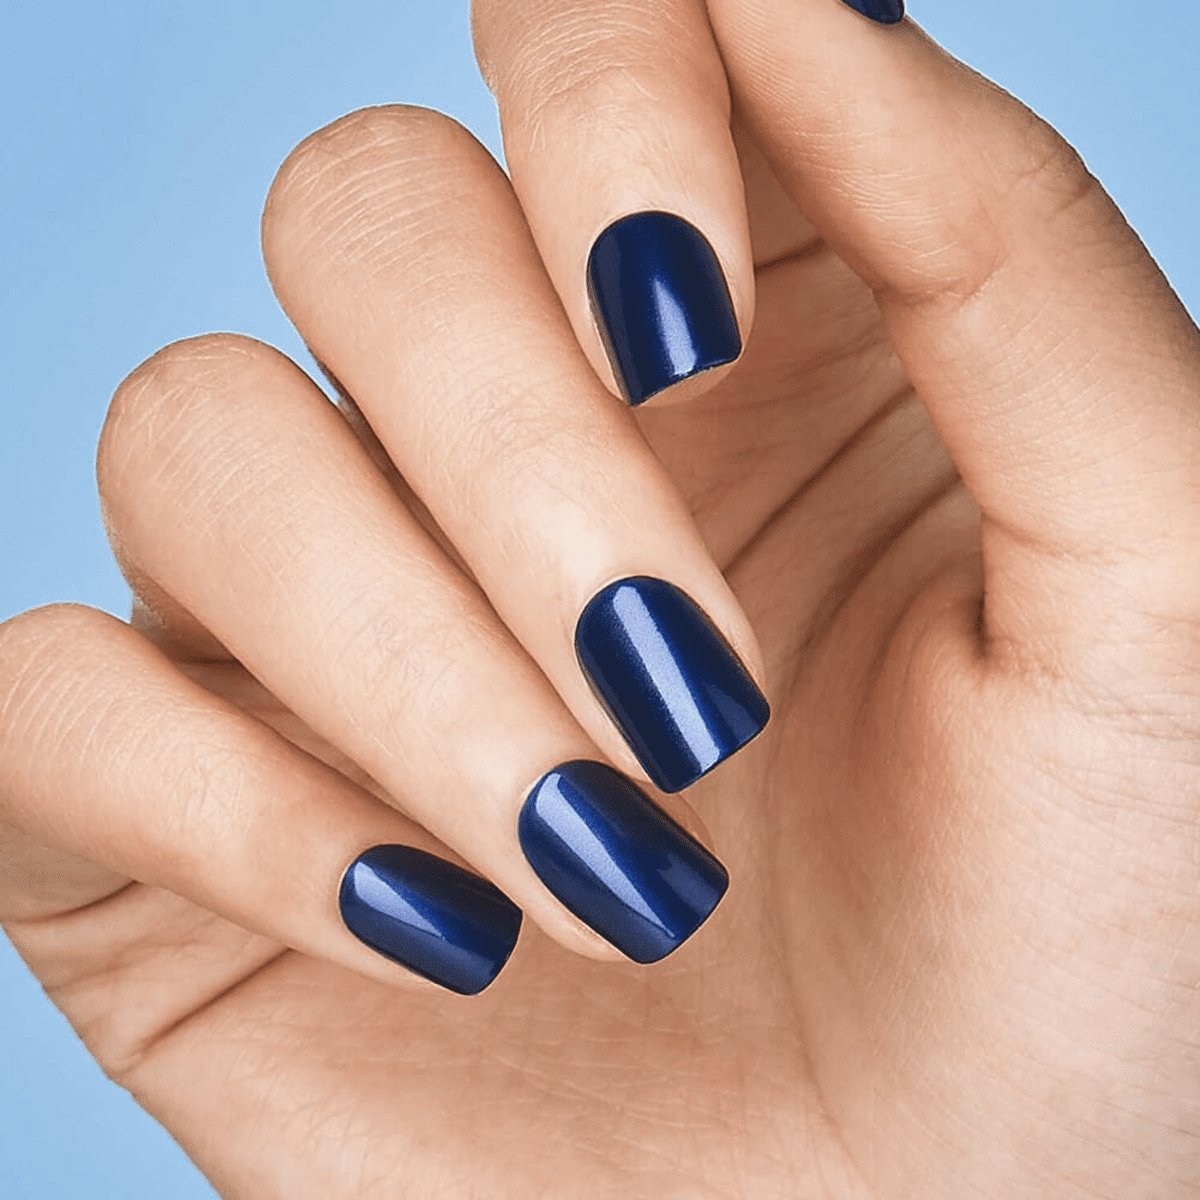 13 Valentine's Nail Ideas for Short Nails - Lux & Concord